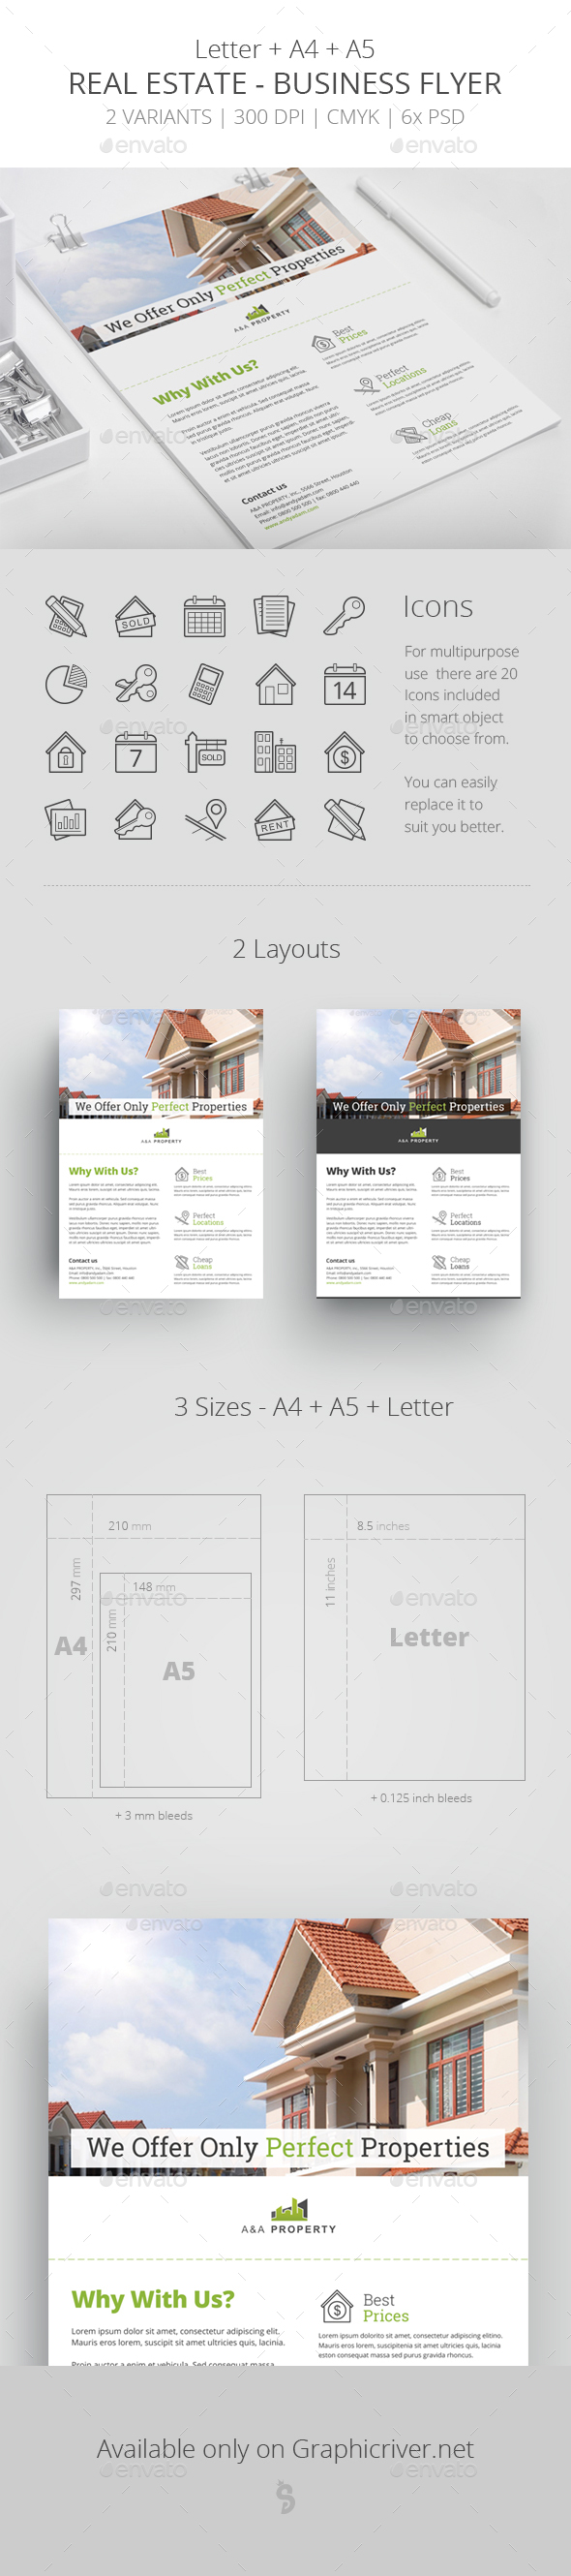 Real Estate - Business Flyer Template 2